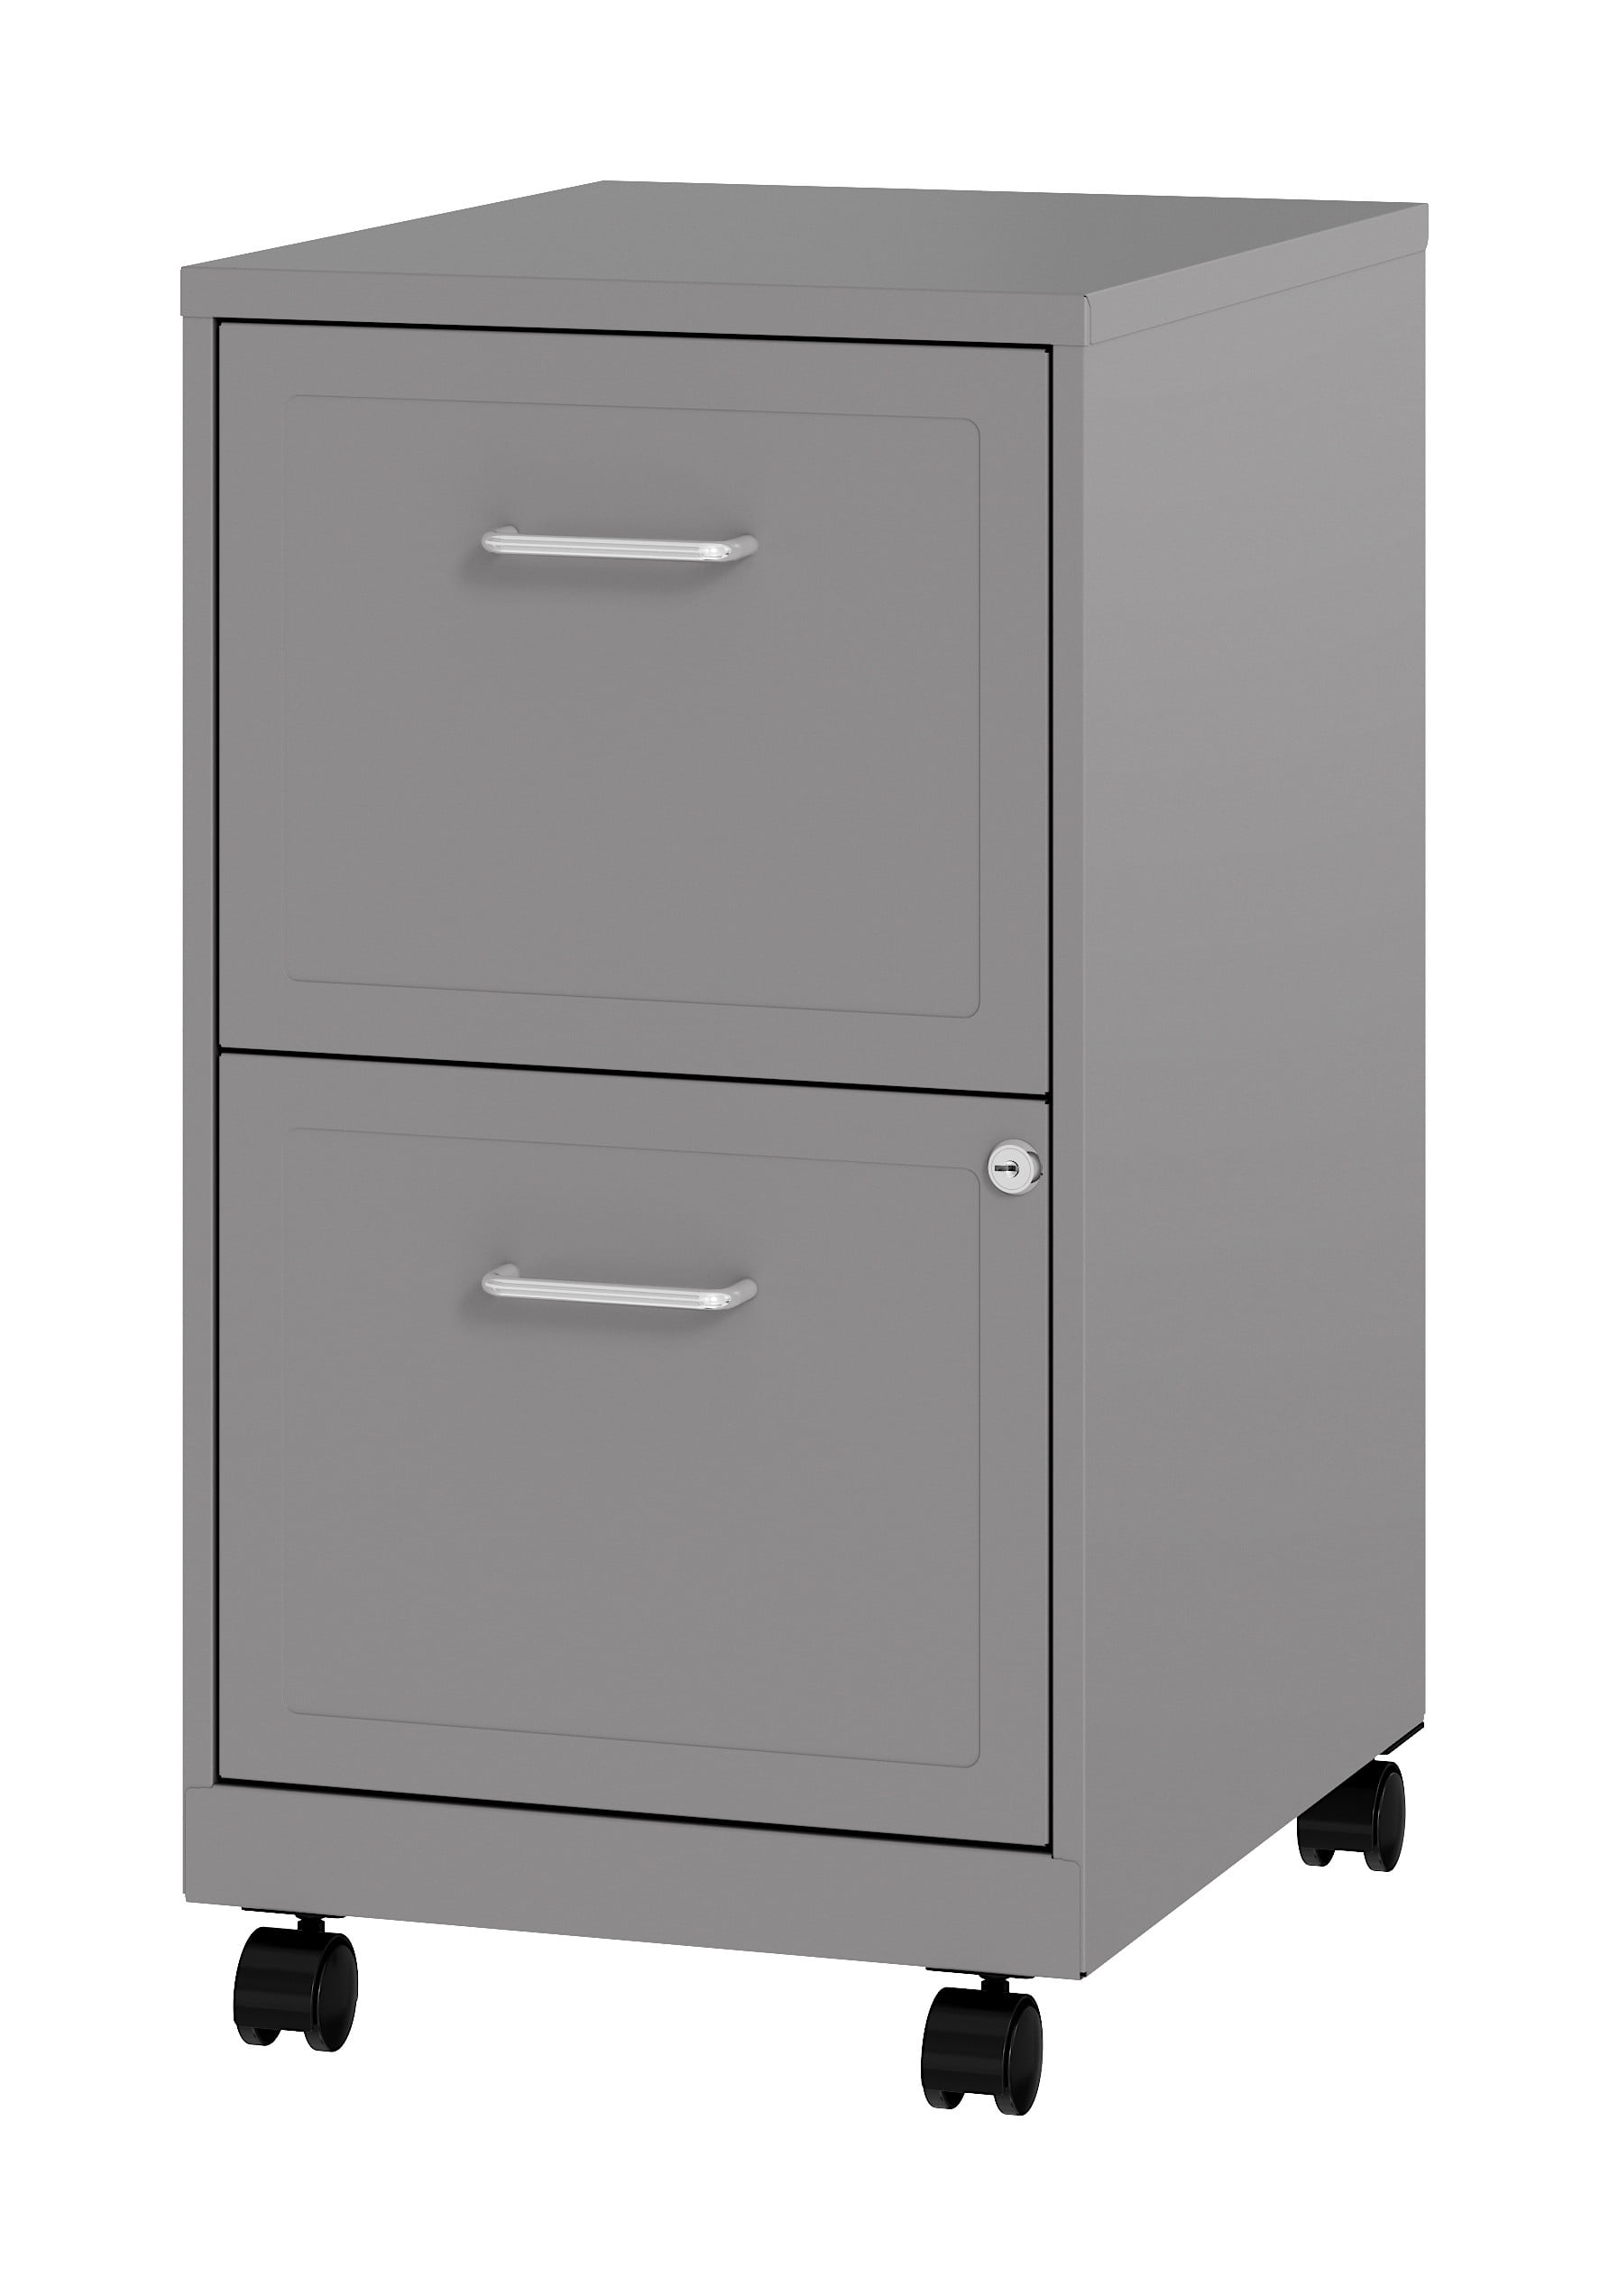 Lorell Space Solutions 18" 2 Drawer Mobile Vertical File Cabinet in Silver - image 12 of 15